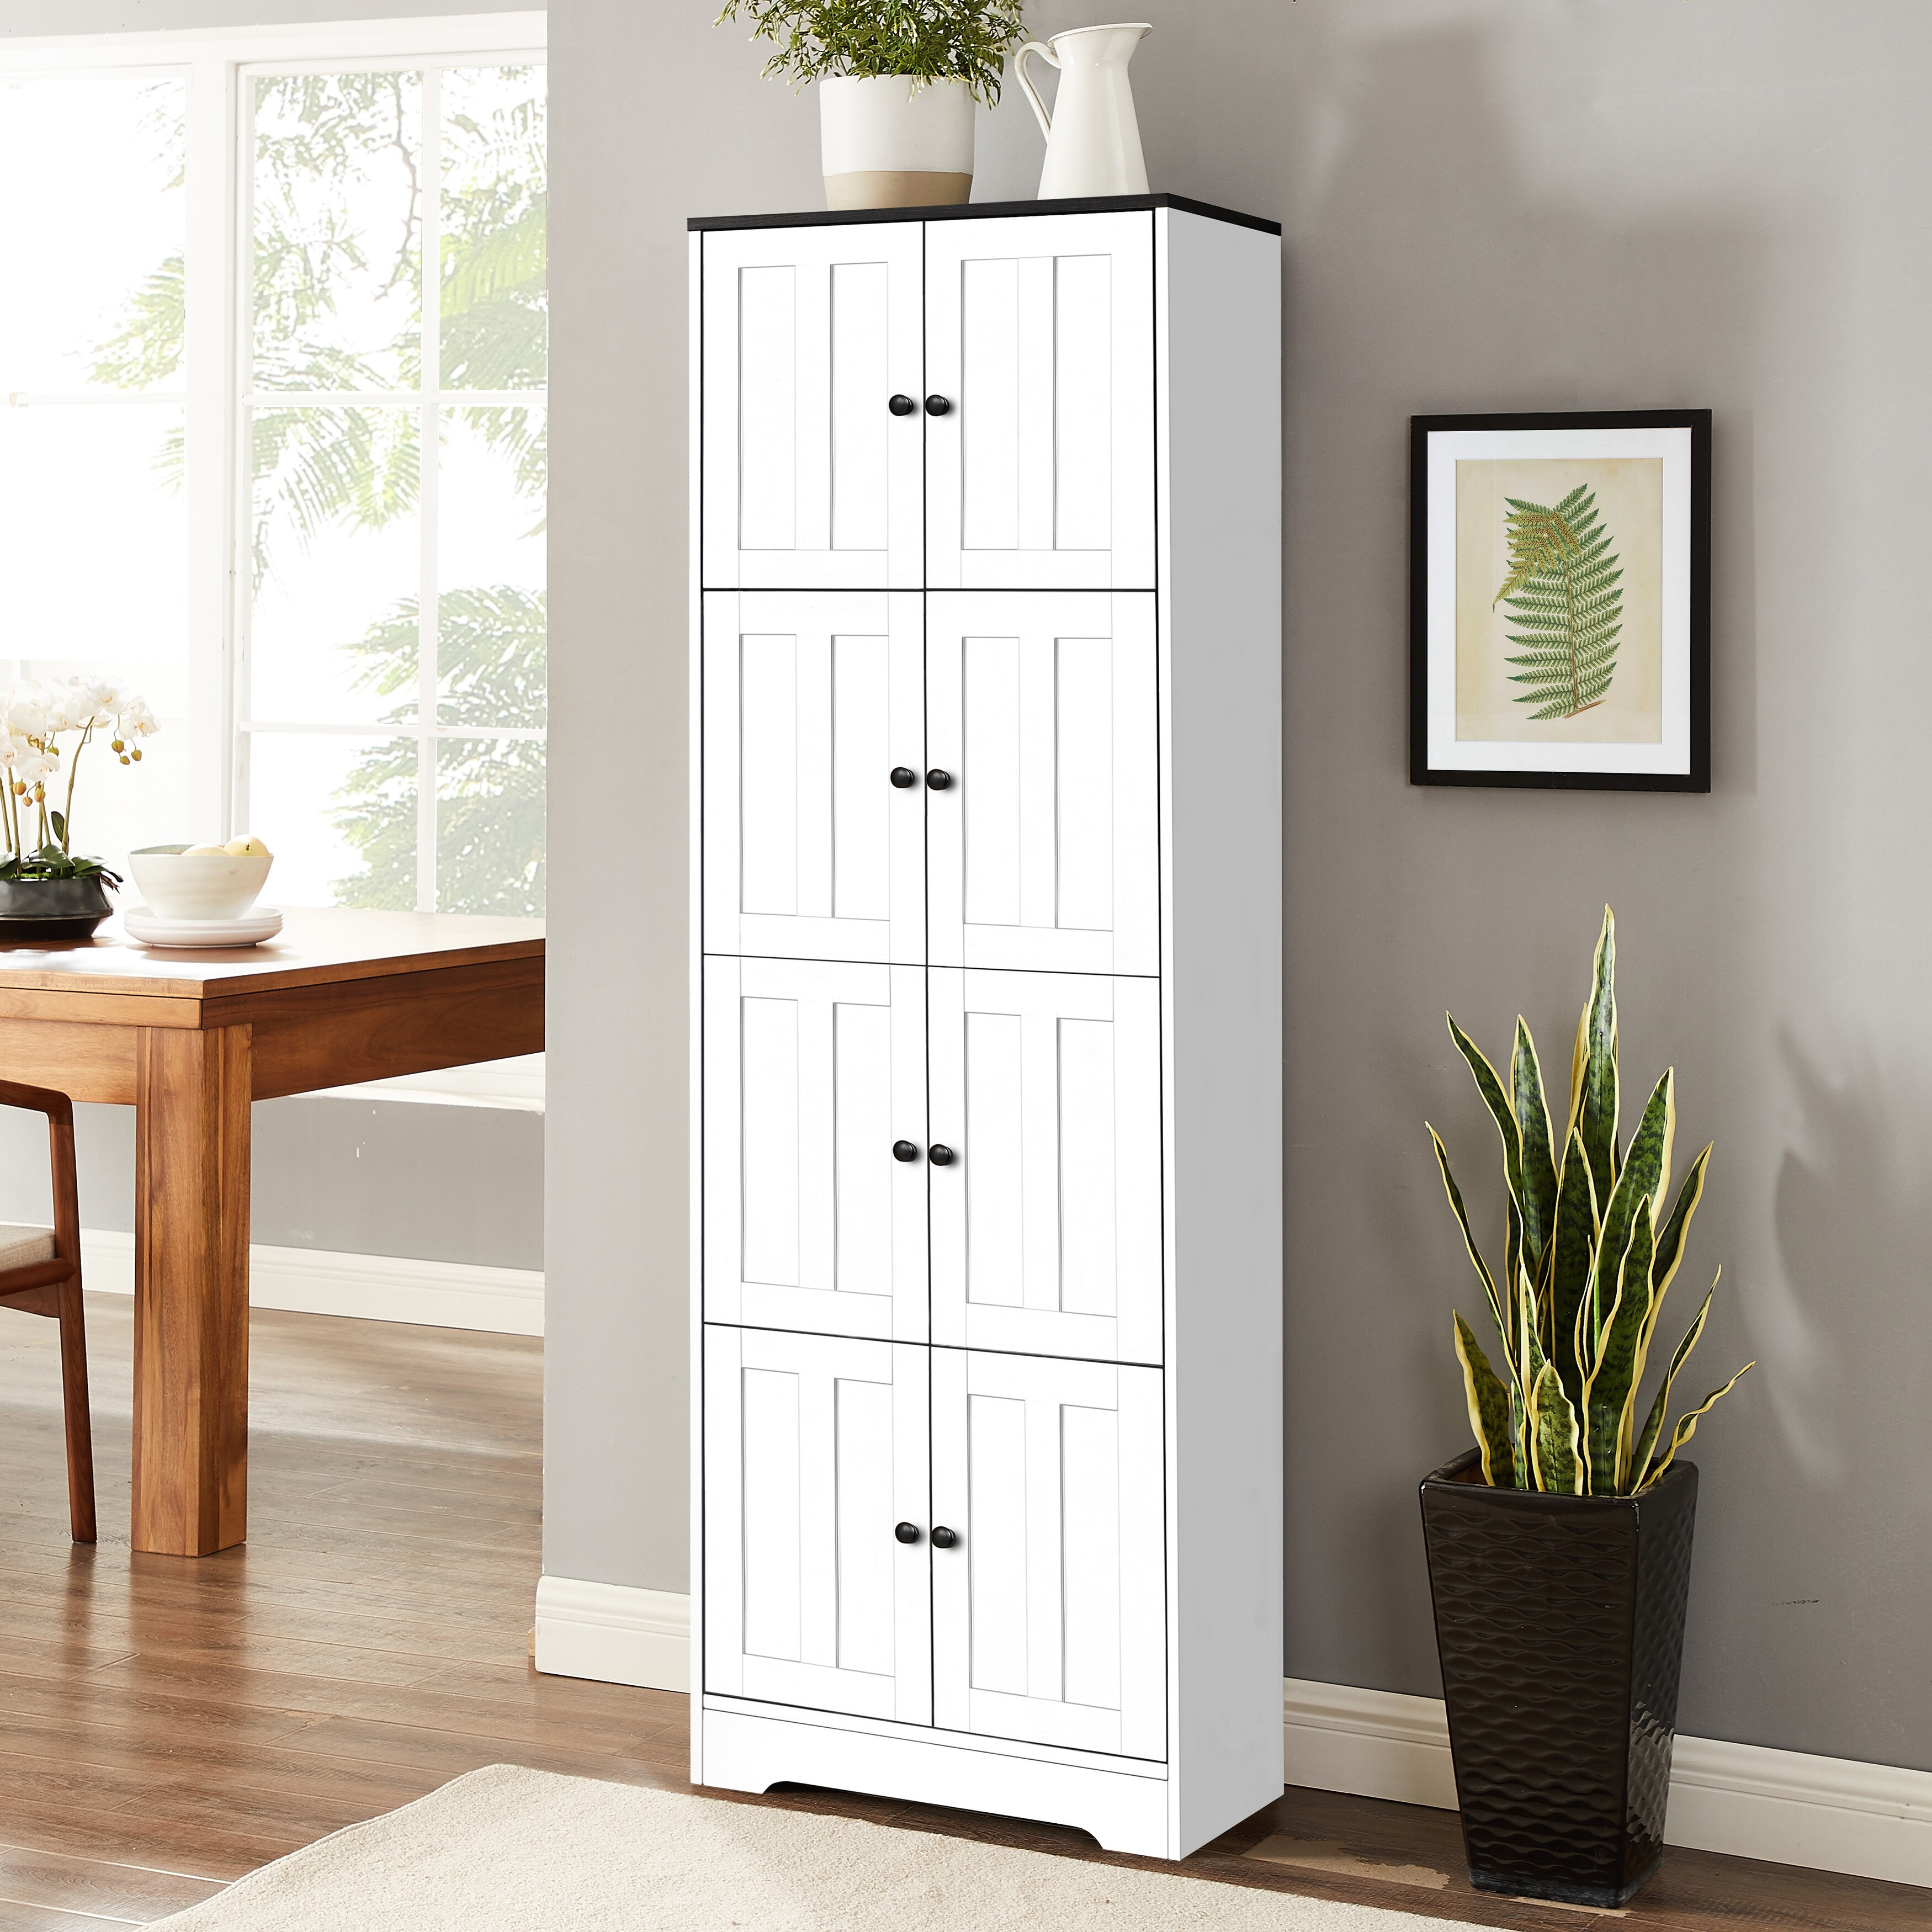 https://ak1.ostkcdn.com/images/products/is/images/direct/5b70df4182b65da6609209458e657725f0d28b32/Tall-Storage-Cabinet-with-4-Doors-and-4-Shelves%2C-Wall-Storage-Cabinet-for-Living-Room%2C-Kitchen%2C-Office%2C-Bedroom%2C-Bathroom.jpg